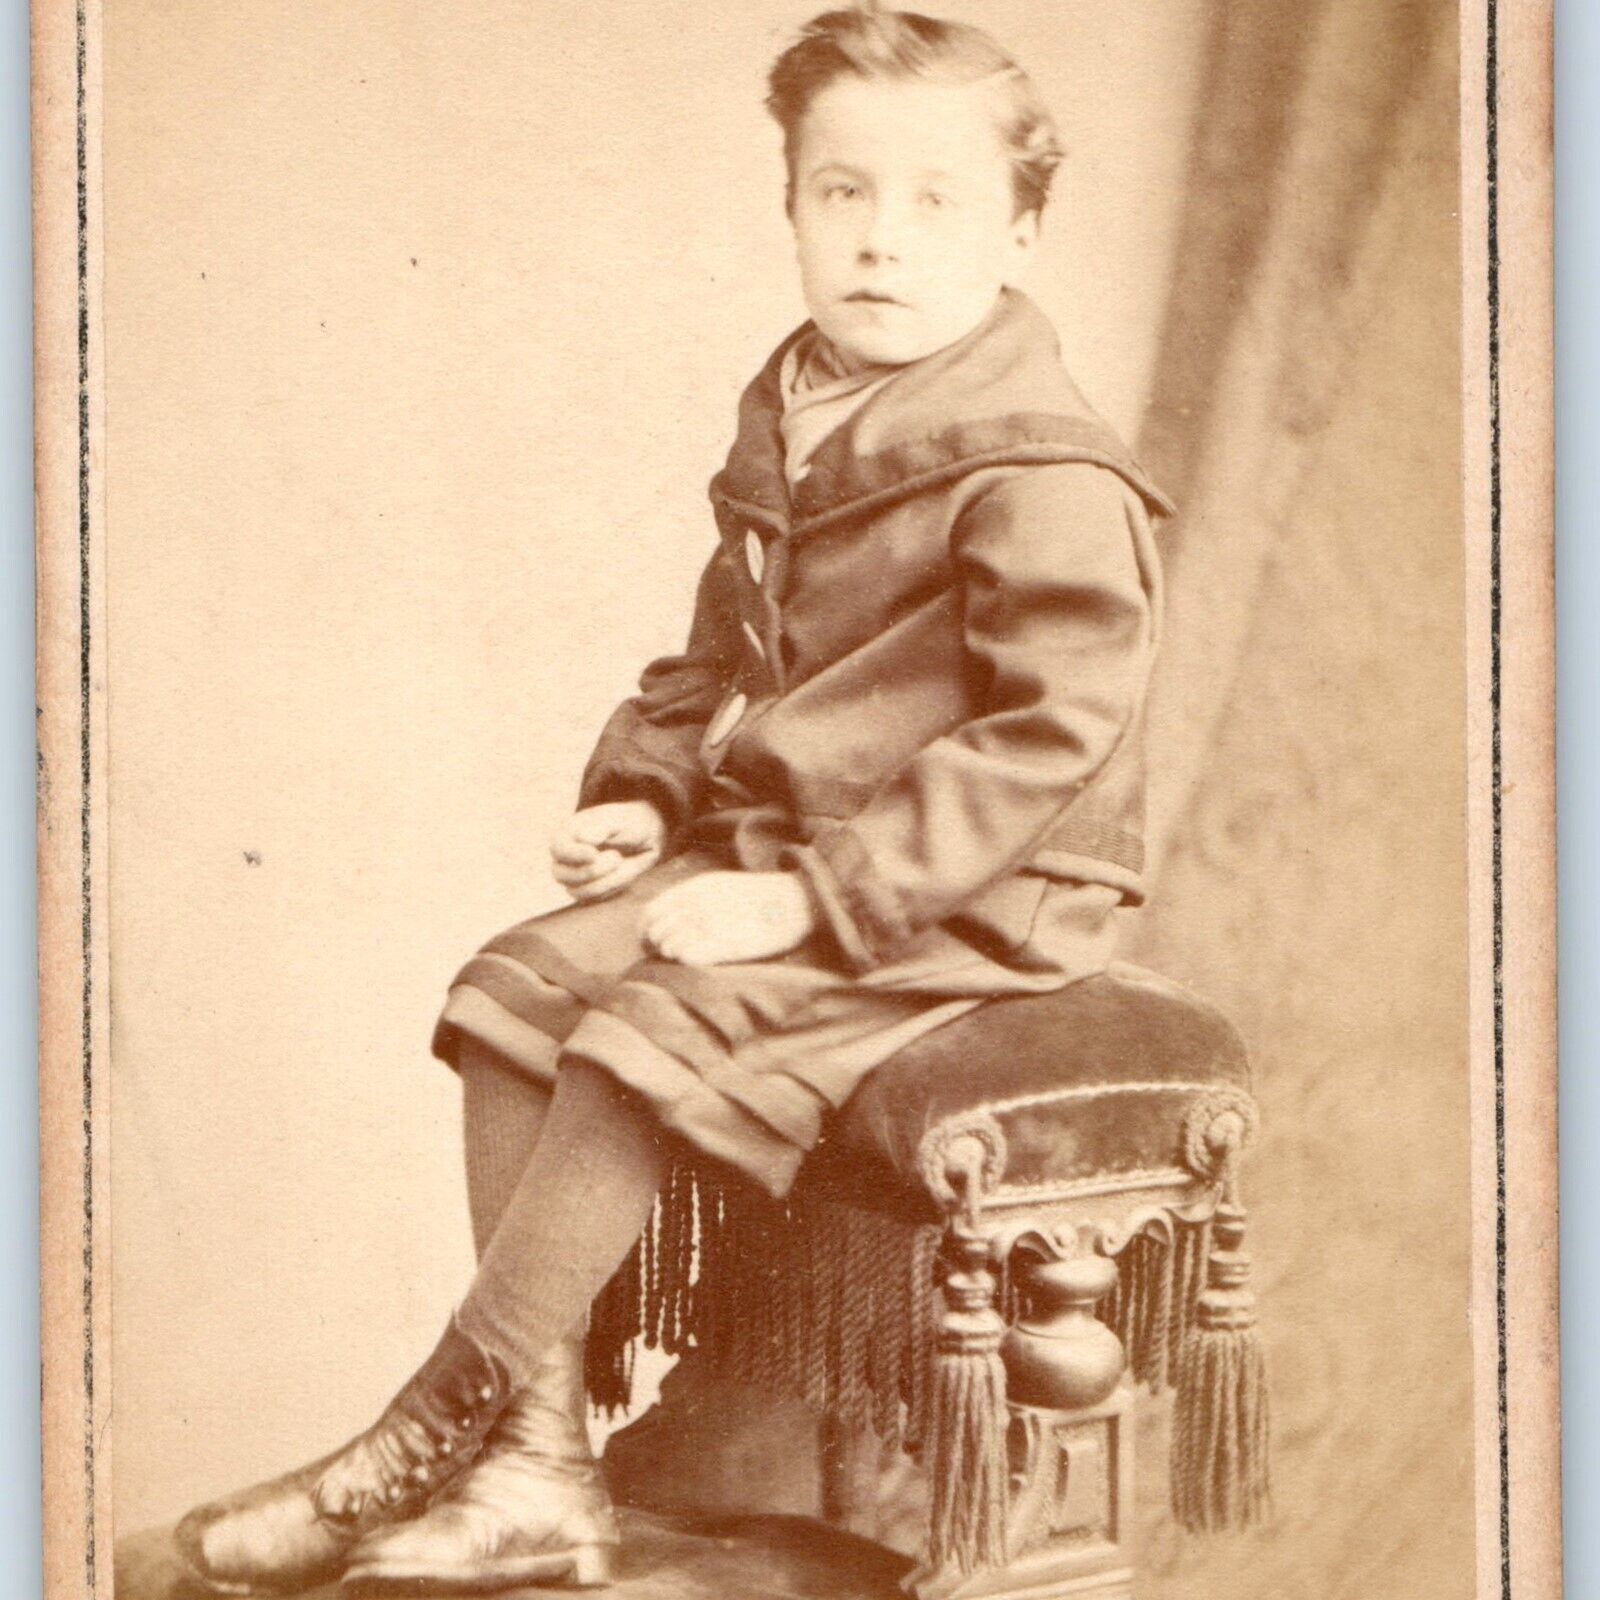 c1874 London, England Boy in Dress CdV Photo Card Forest Hill Royal Queen H16